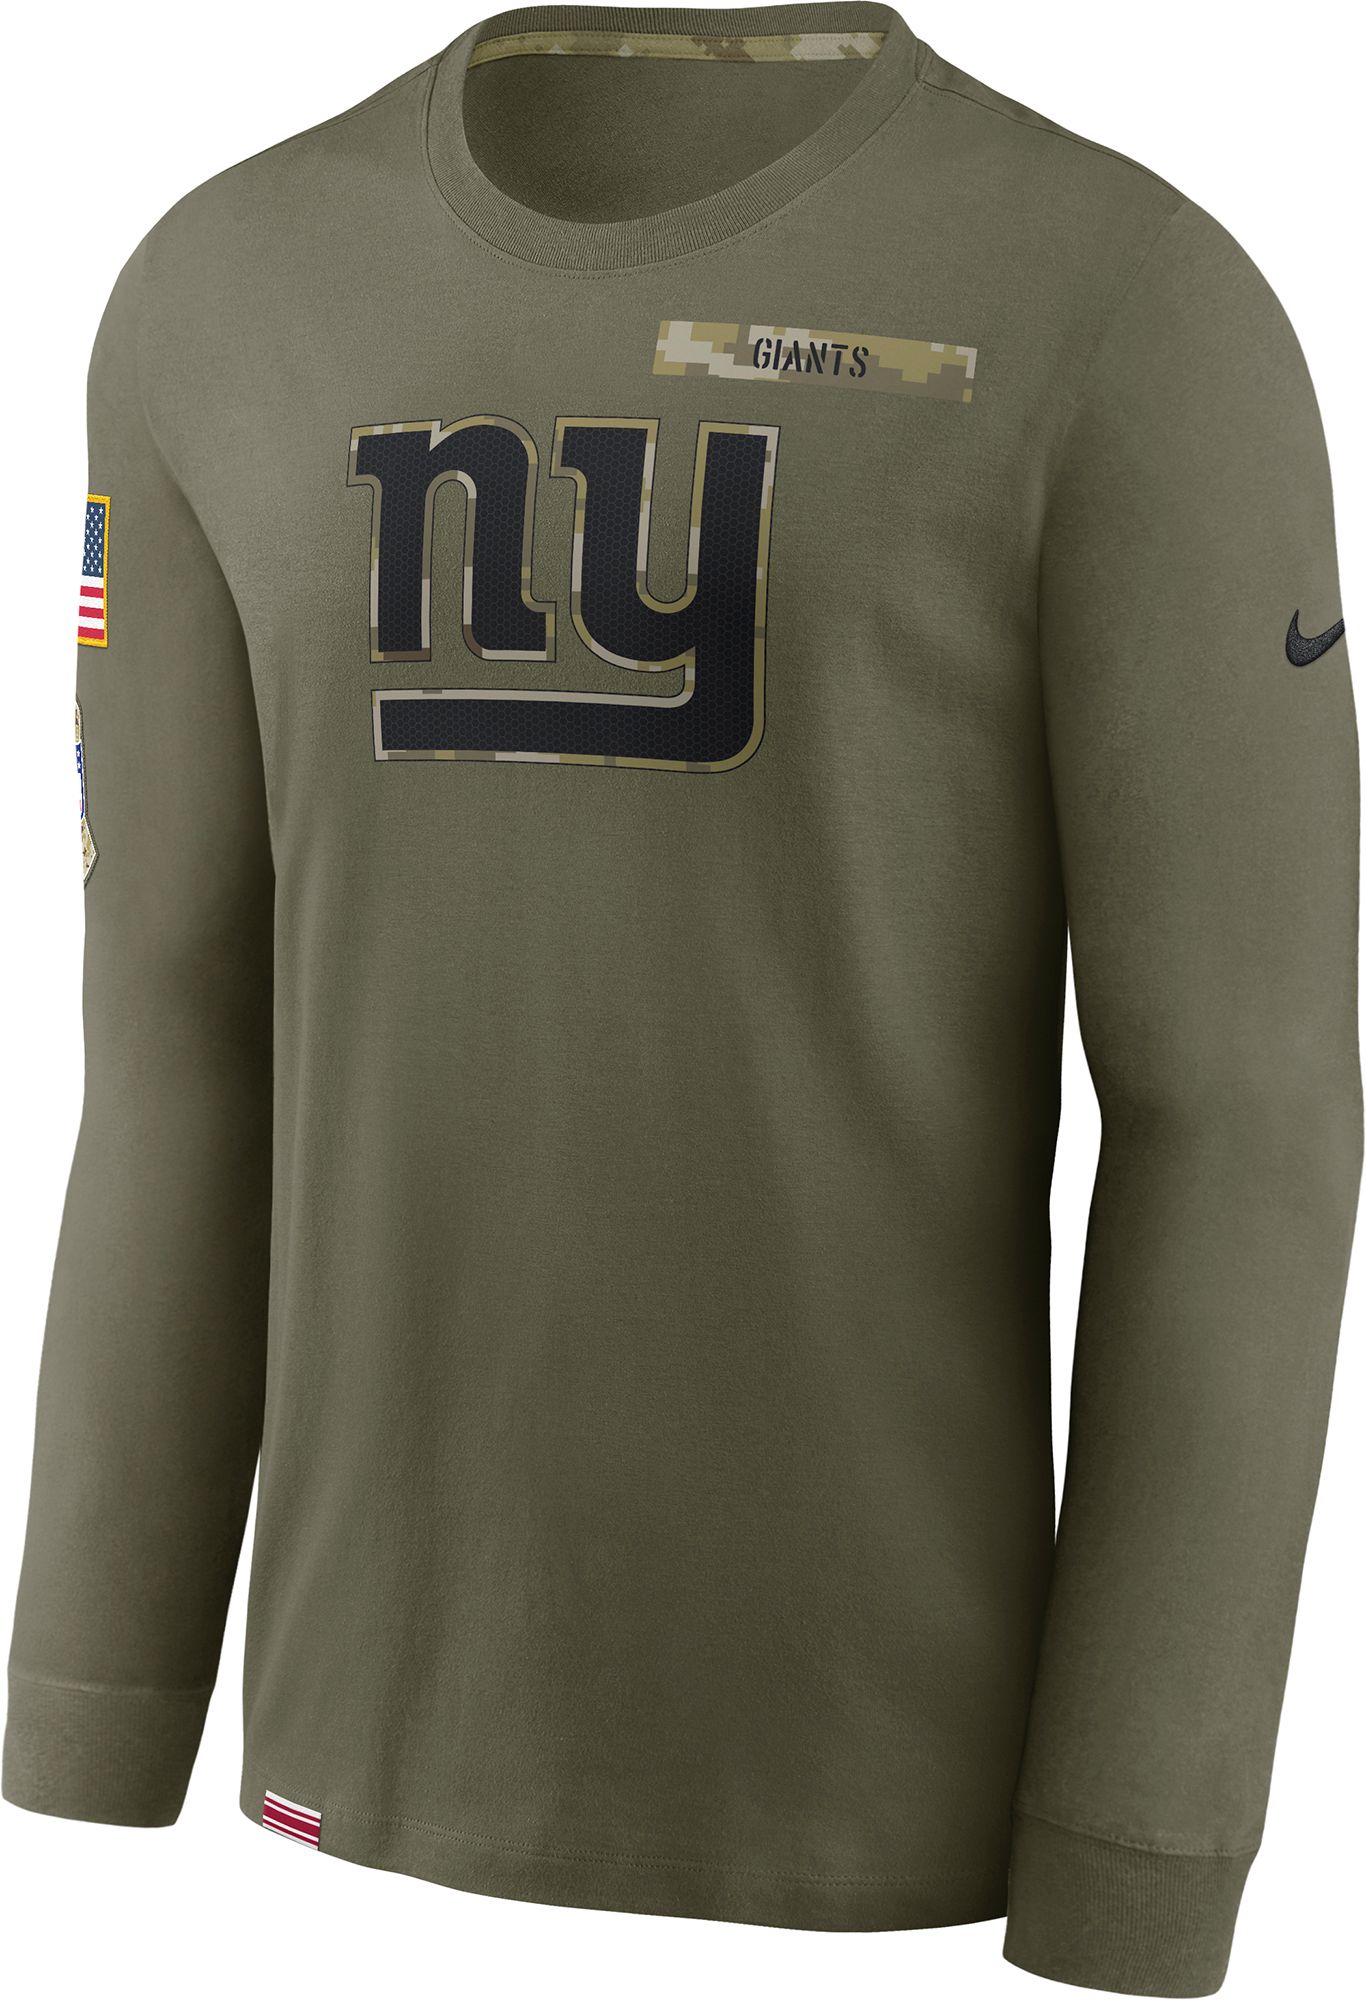 Nike / Men's New York Giants Salute to Service Olive Long Sleeve T-Shirt